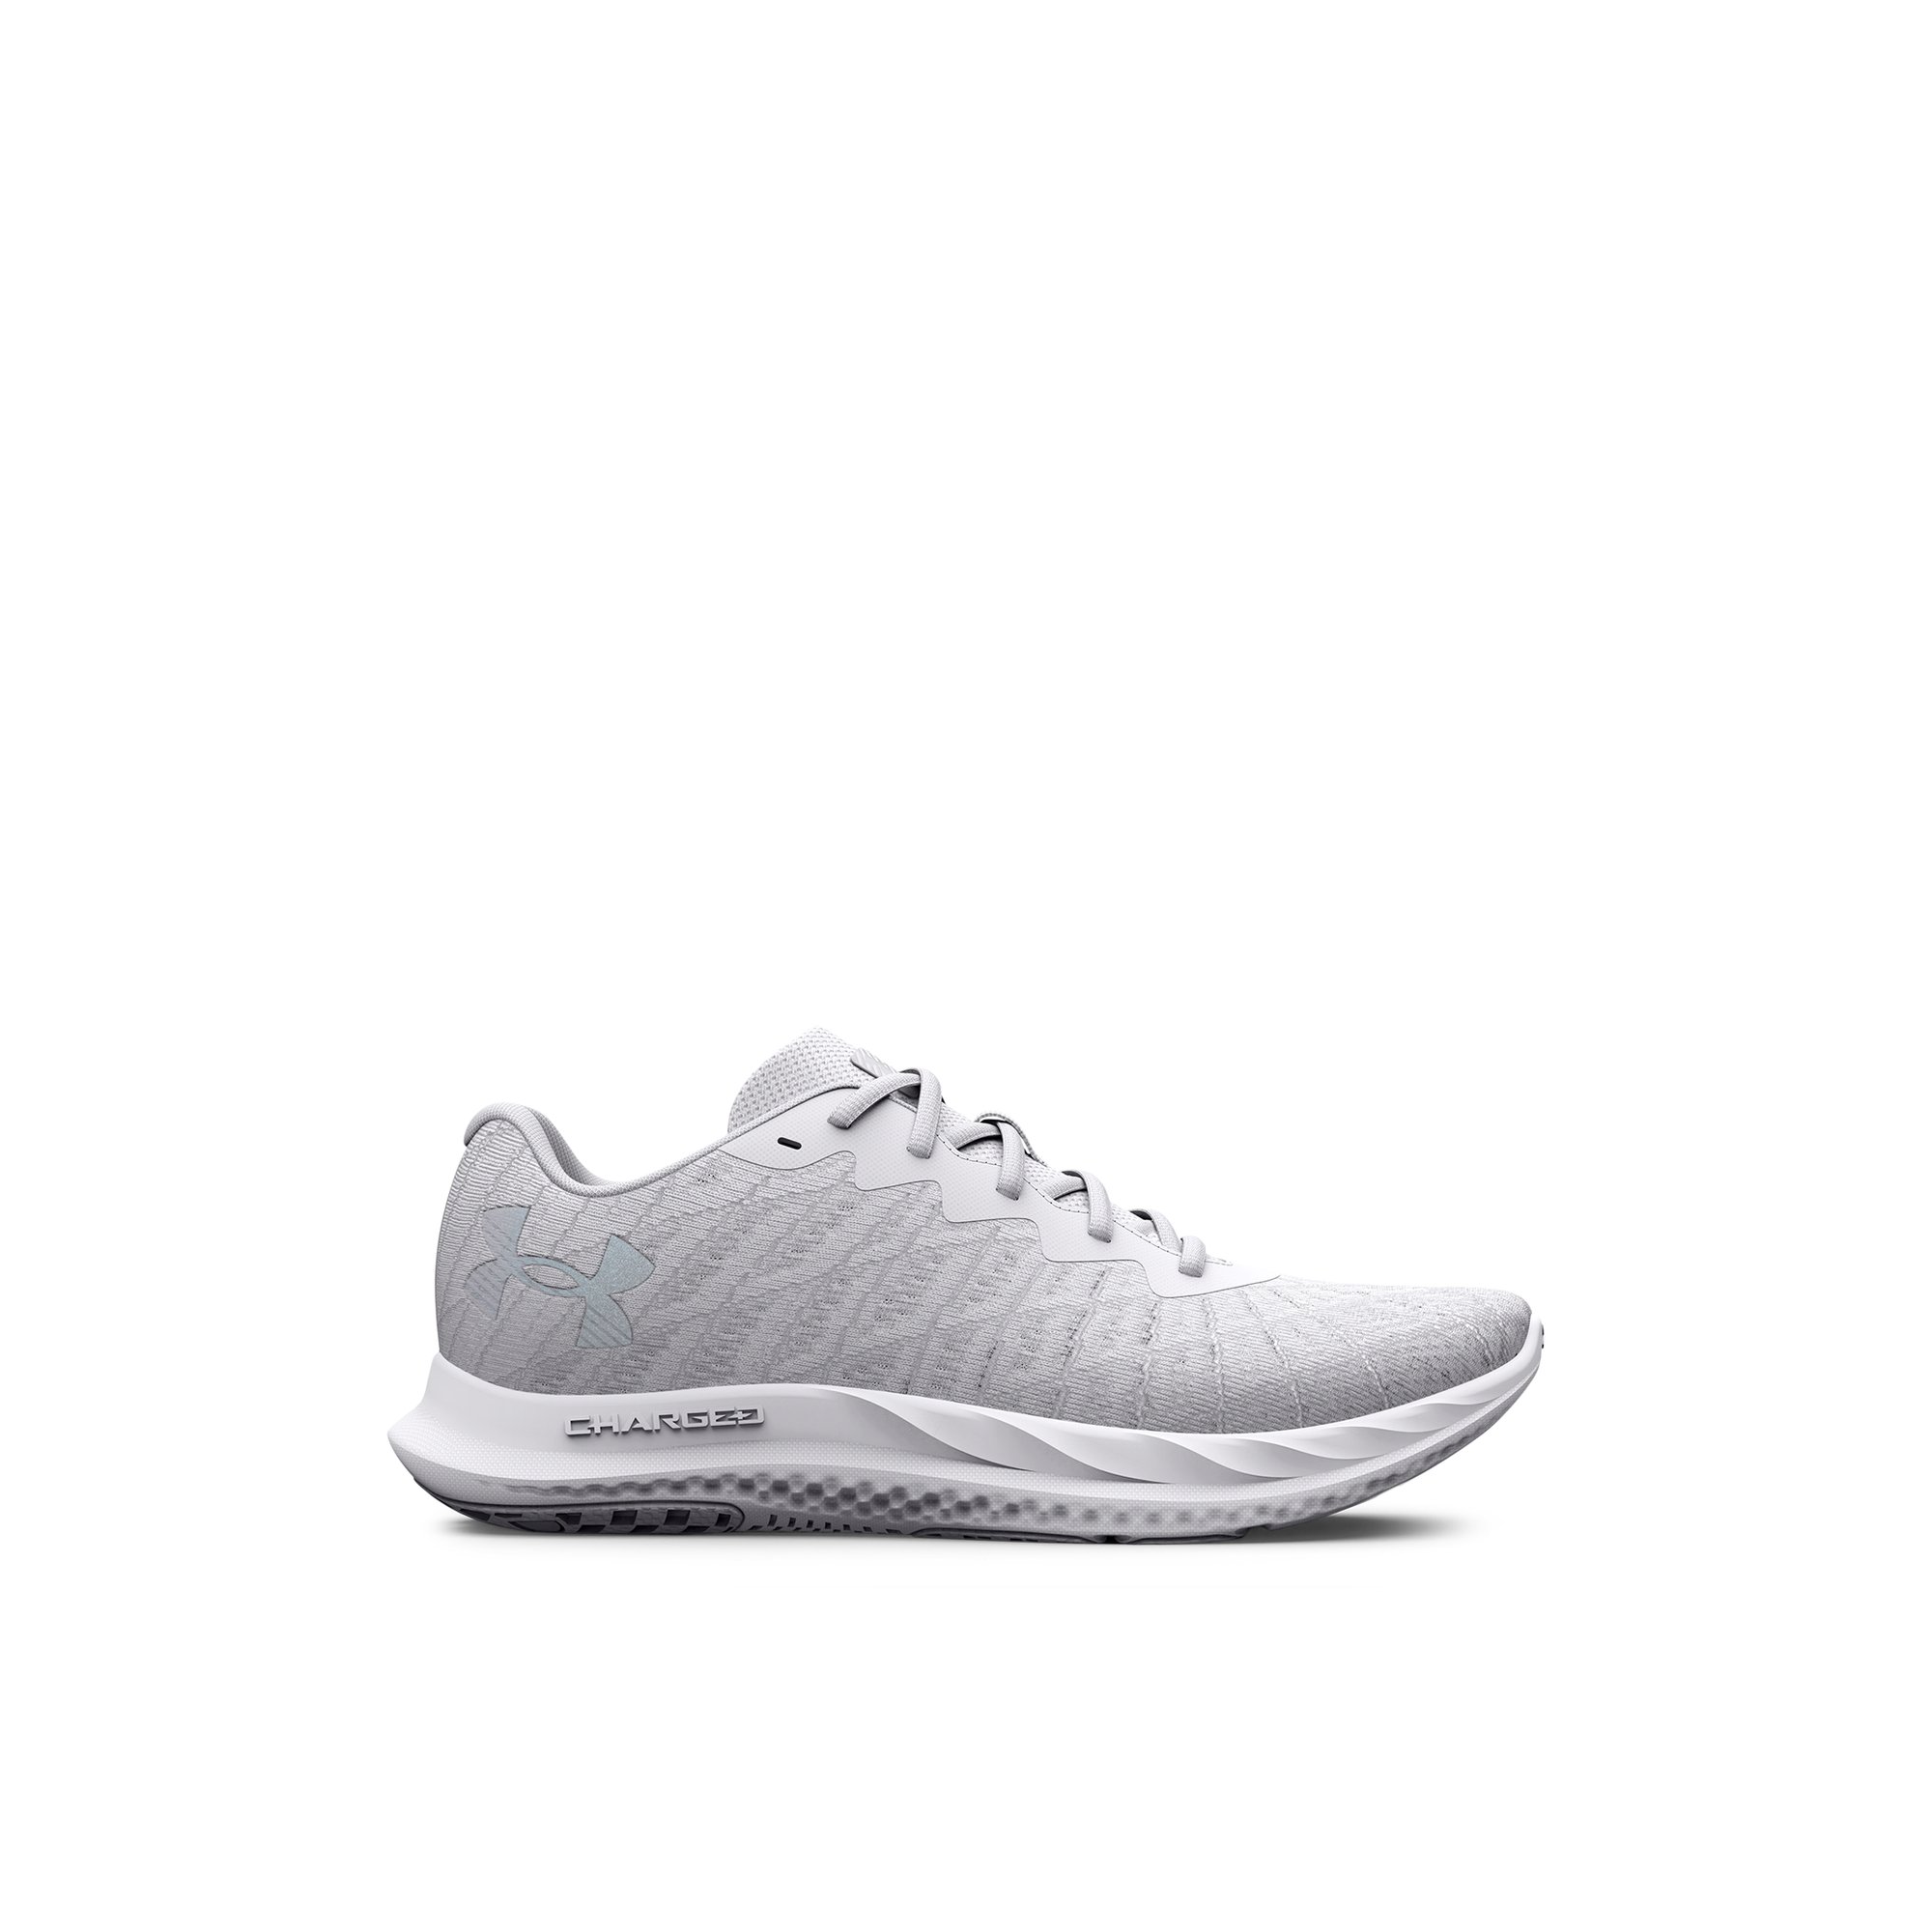 Under Armour Charge breeze2 - Women's Shoes White